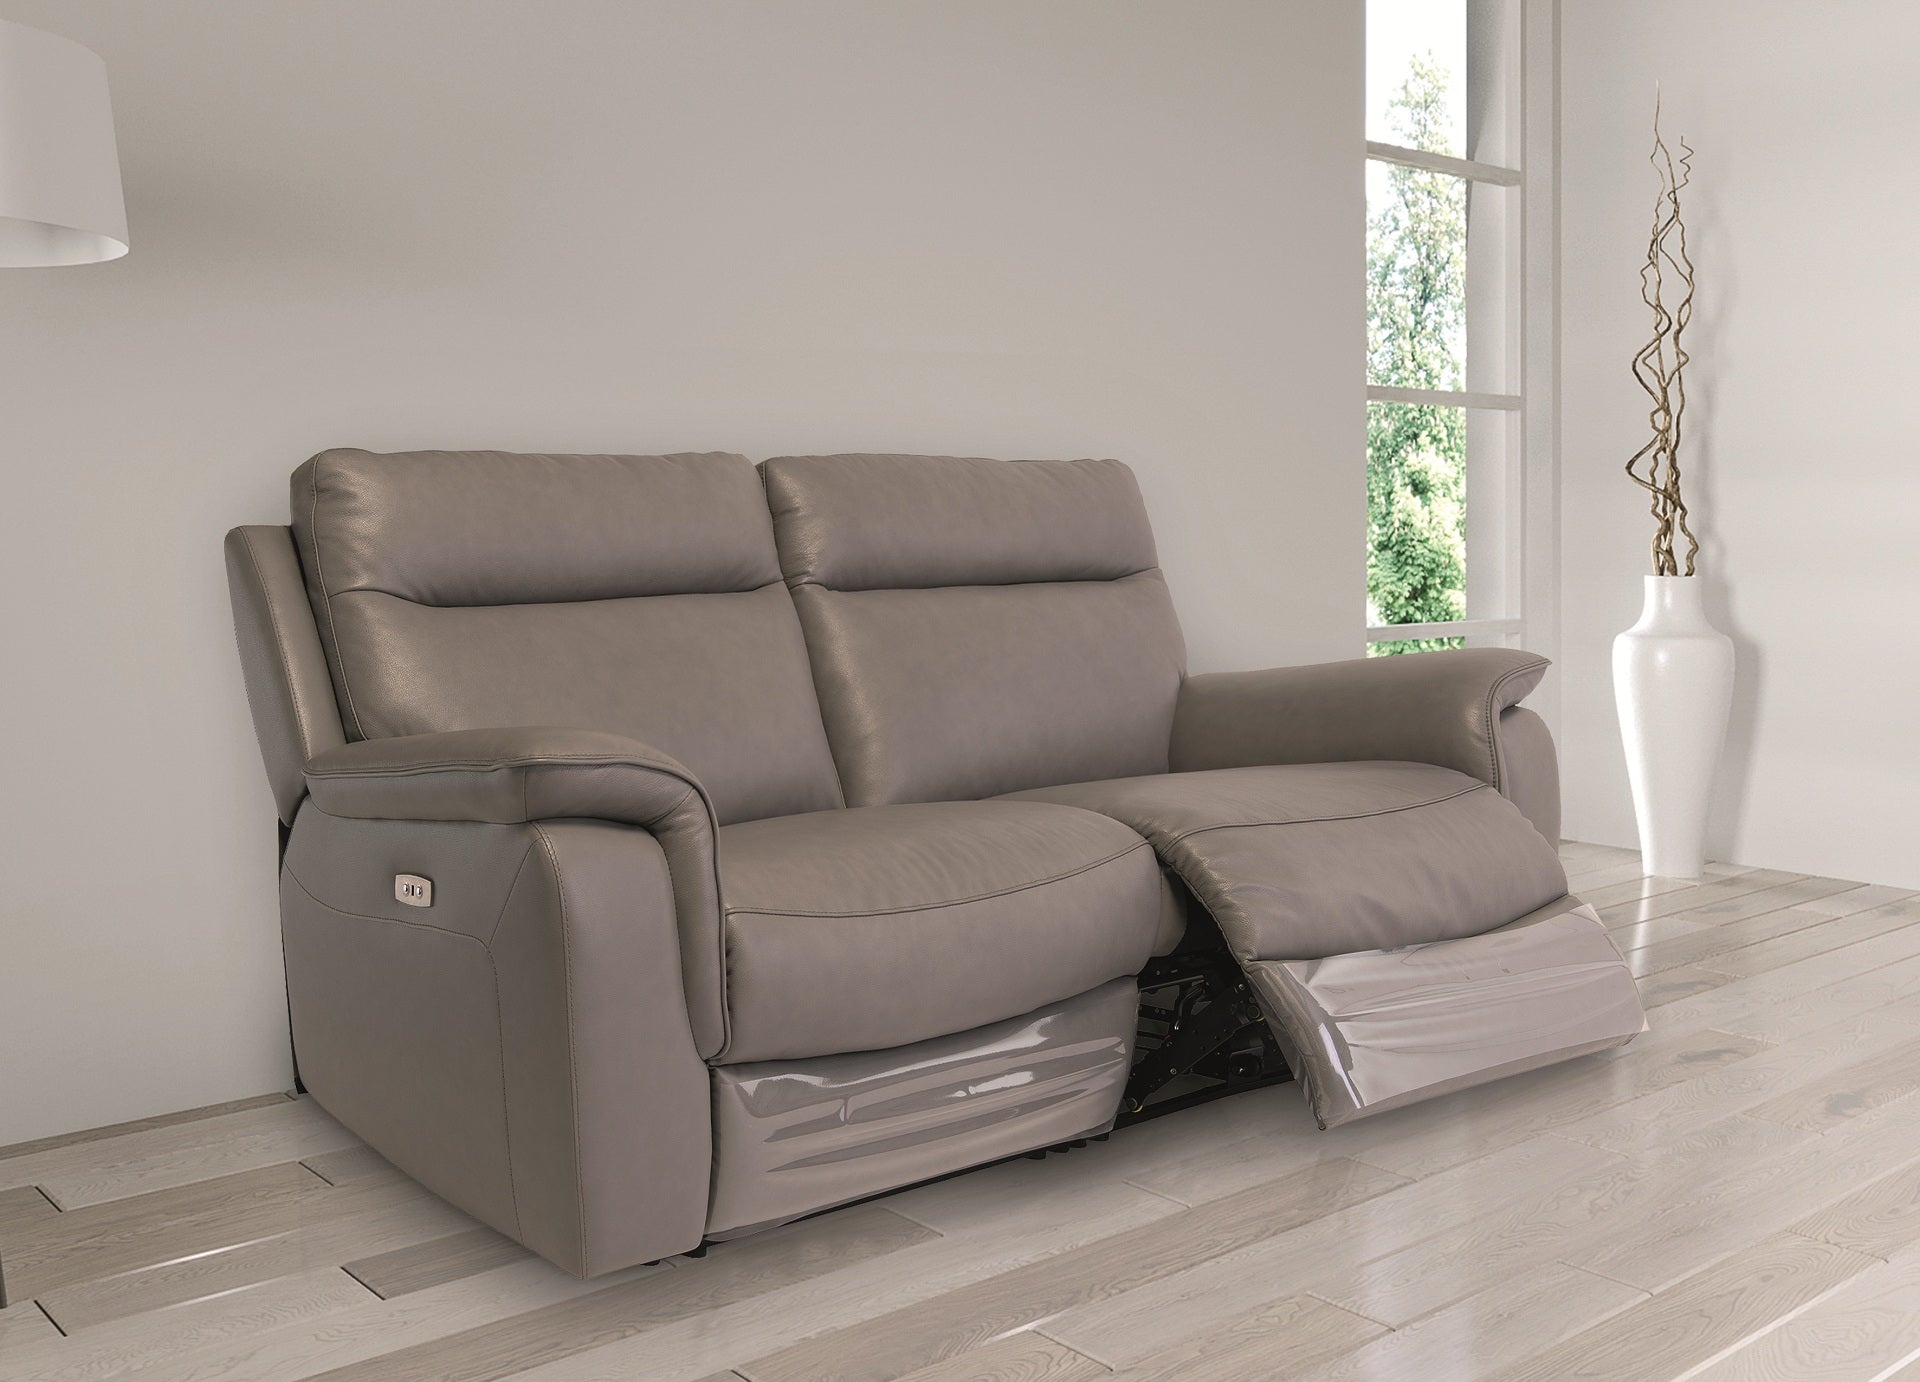 Hanna Leather Electric 3 Seater Recliner - Grey